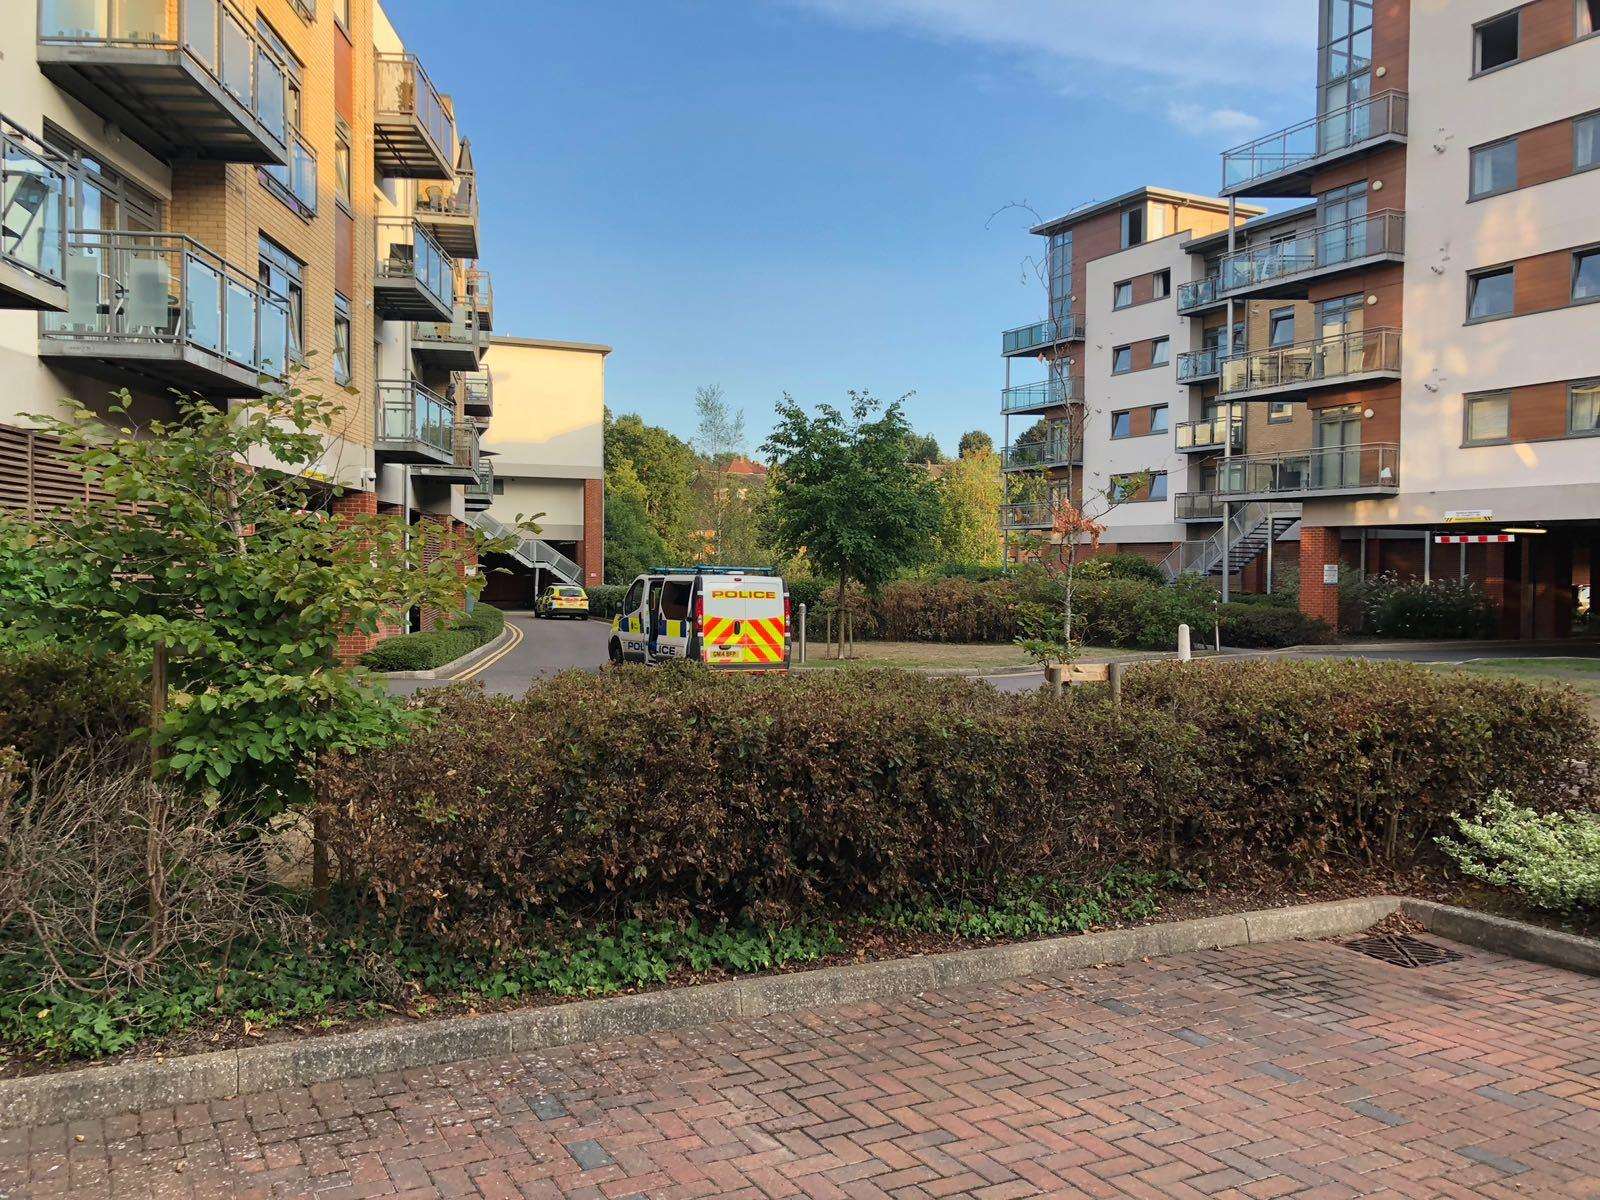 Four police cars and three ambulances were seen at Wallis Place flats off Hart Street in Maidstone (3431742)